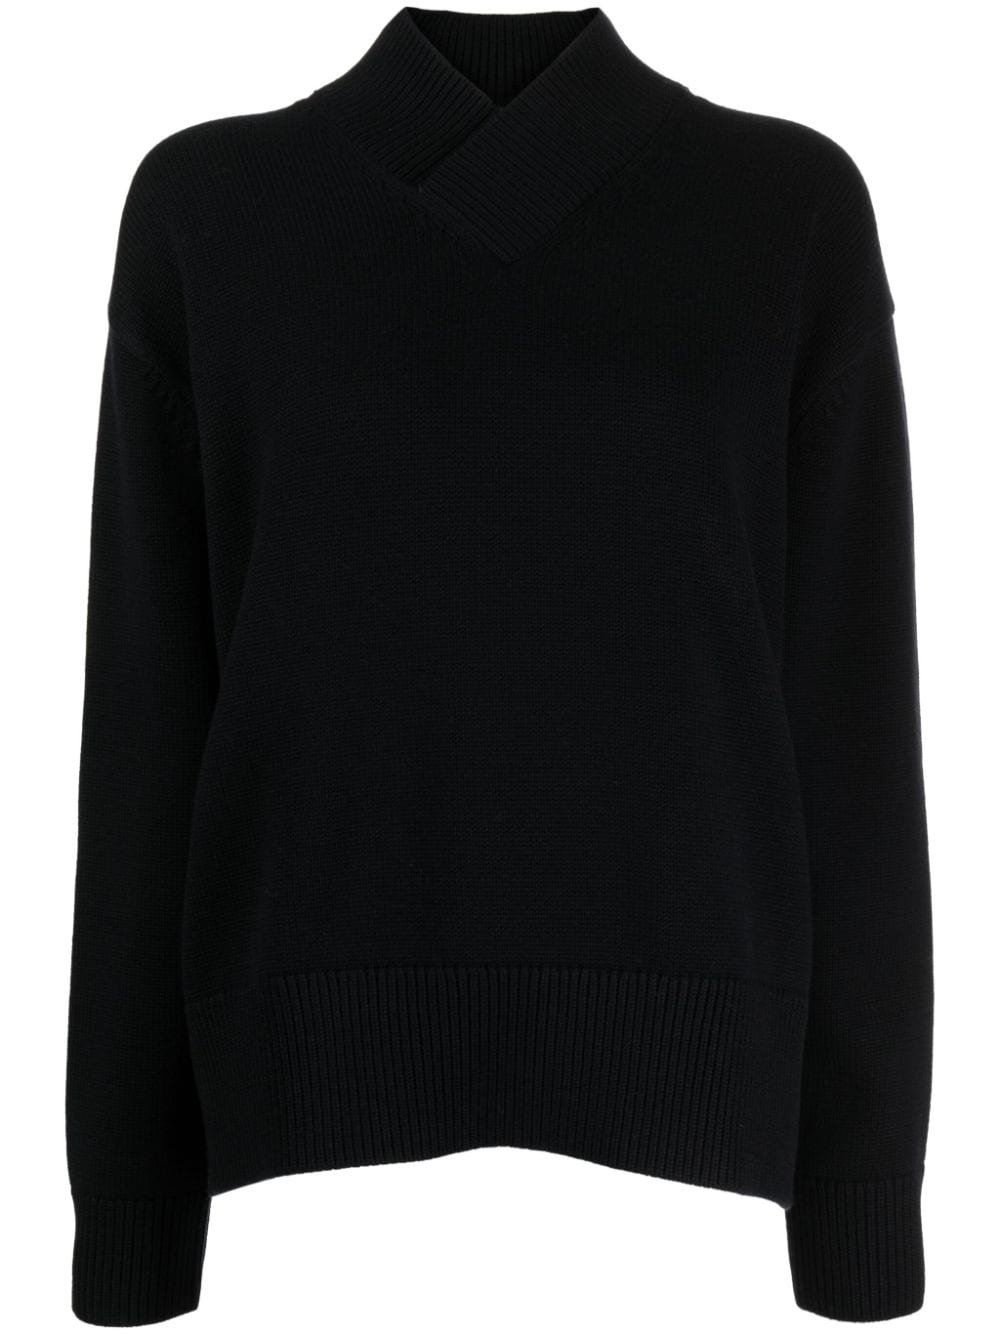 crossover-neck knitted jumper - 1